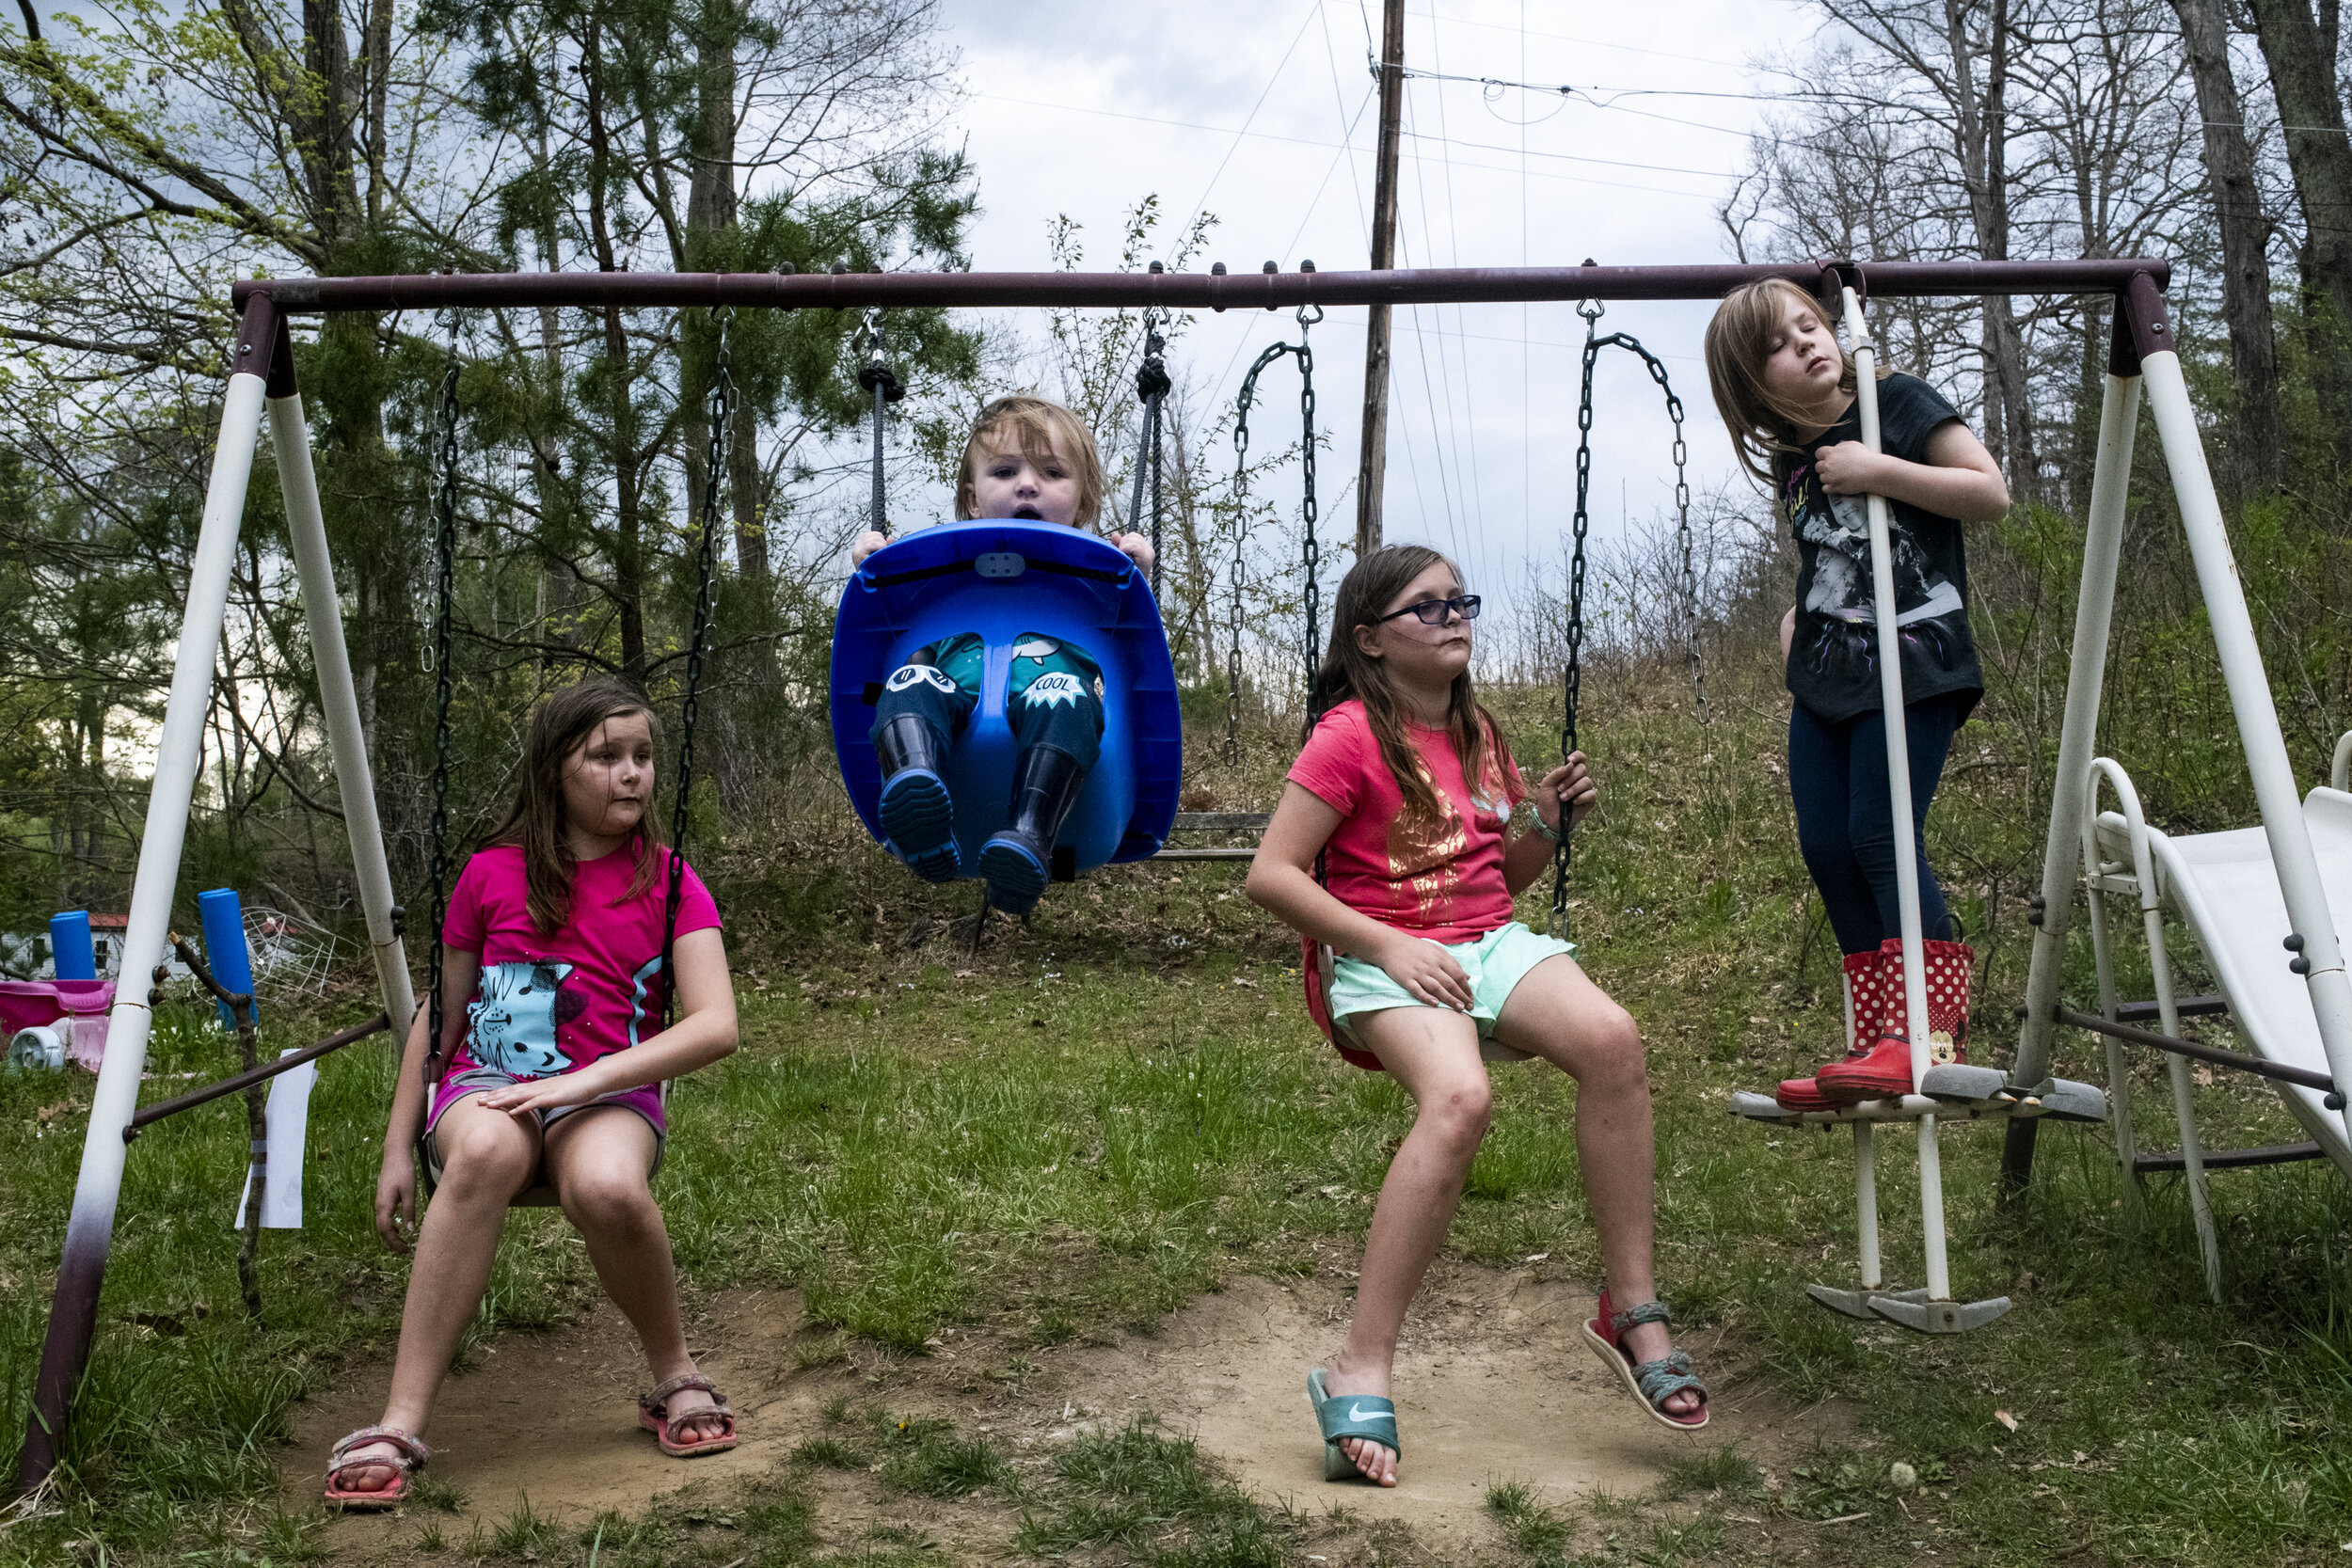  Rylie, Dominic, Ella and Izzy Cress play on the swingset in their front lawn in New Marshfield, Ohio in April 2019. Rylie and Ella are twin sisters and live on the same property as their cousins, Dominic and Izzy.  